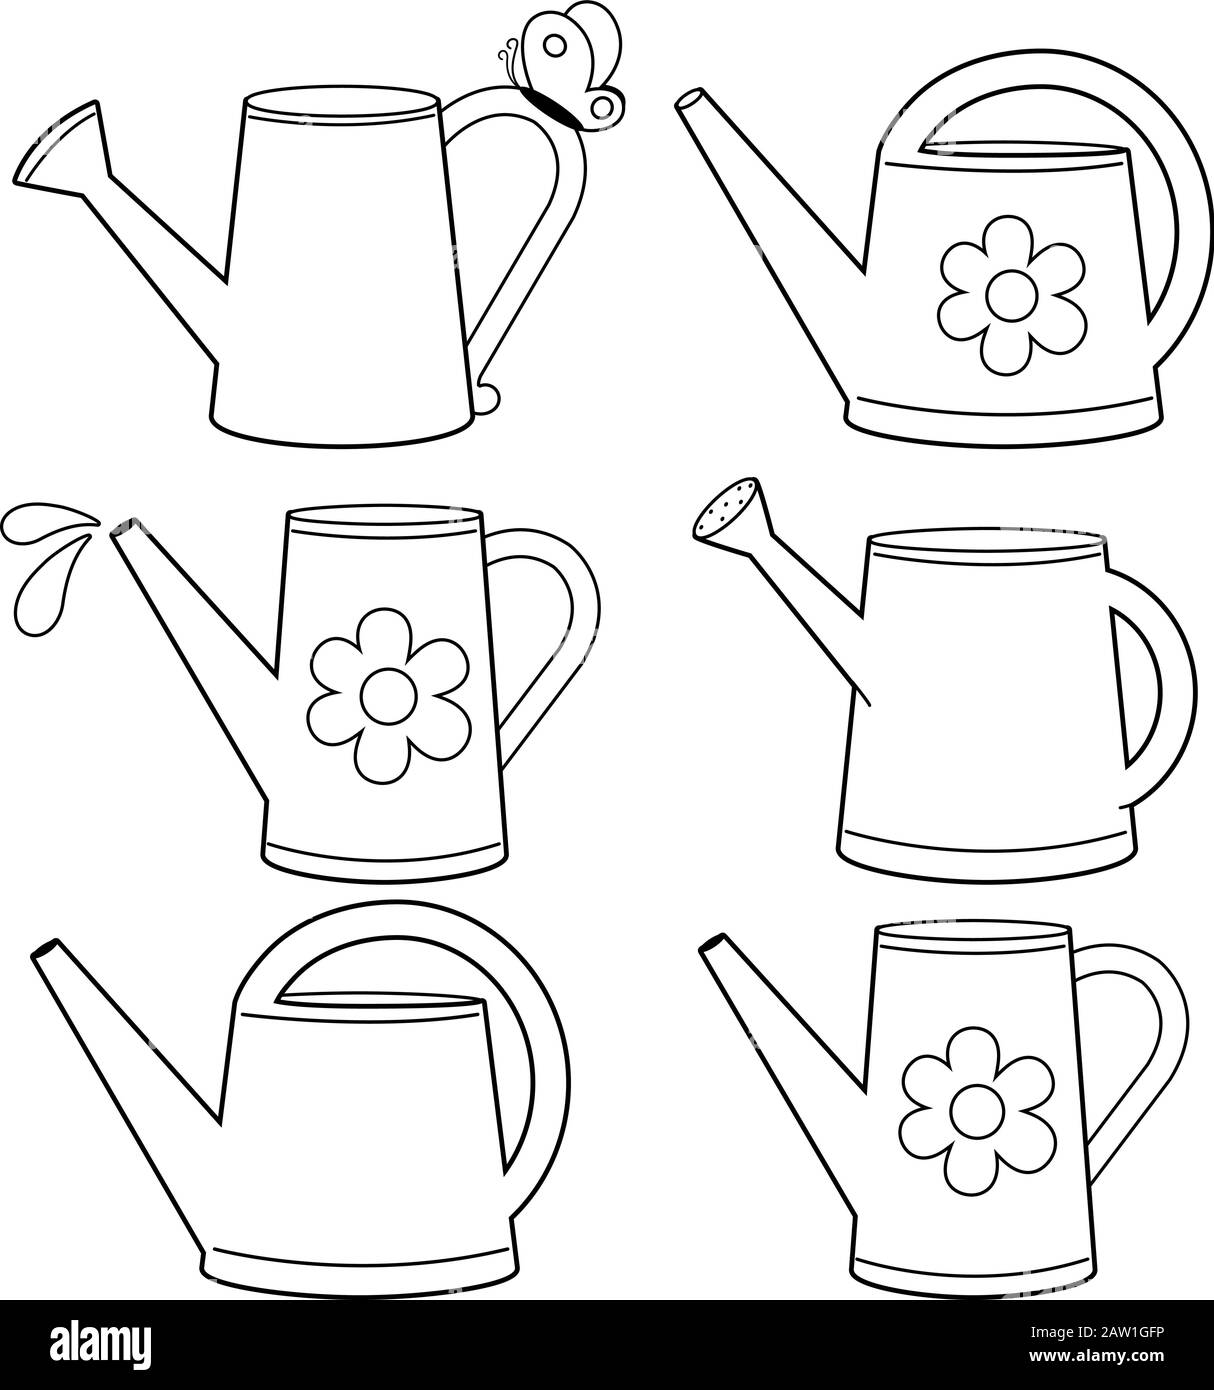 Watering cans illustration collection vector black and white coloring page stock vector image art